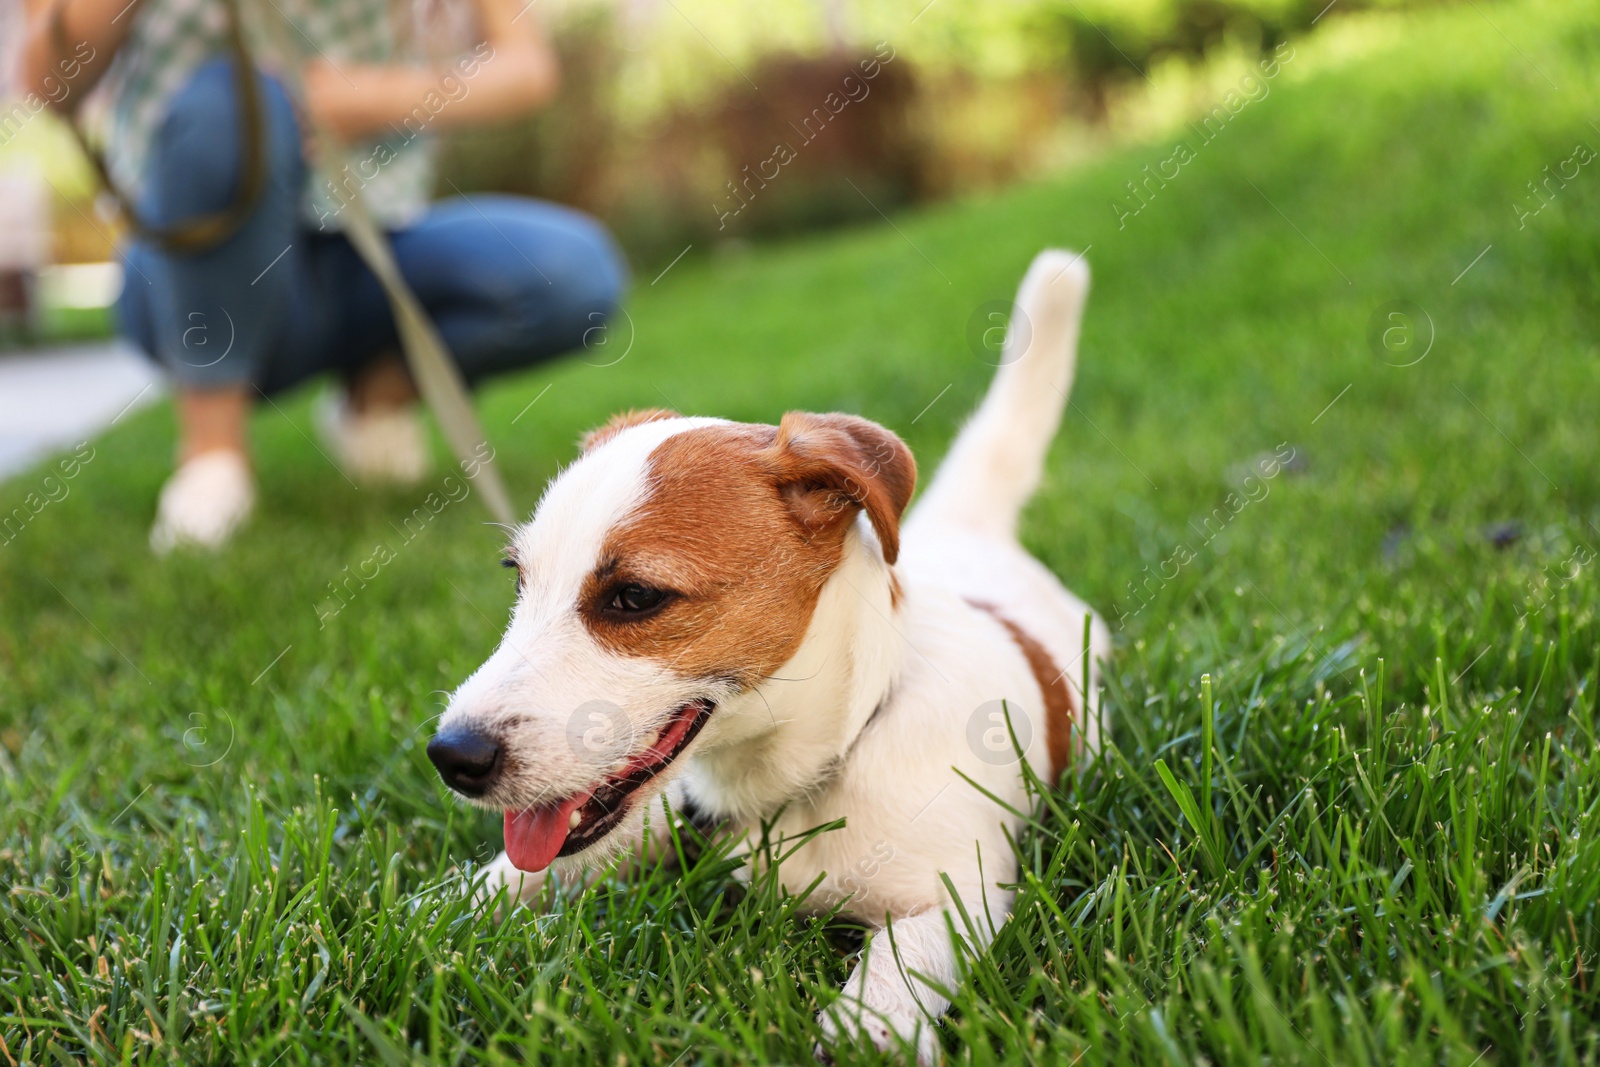 Photo of Adorable Jack Russell Terrier dog on green grass outdoors